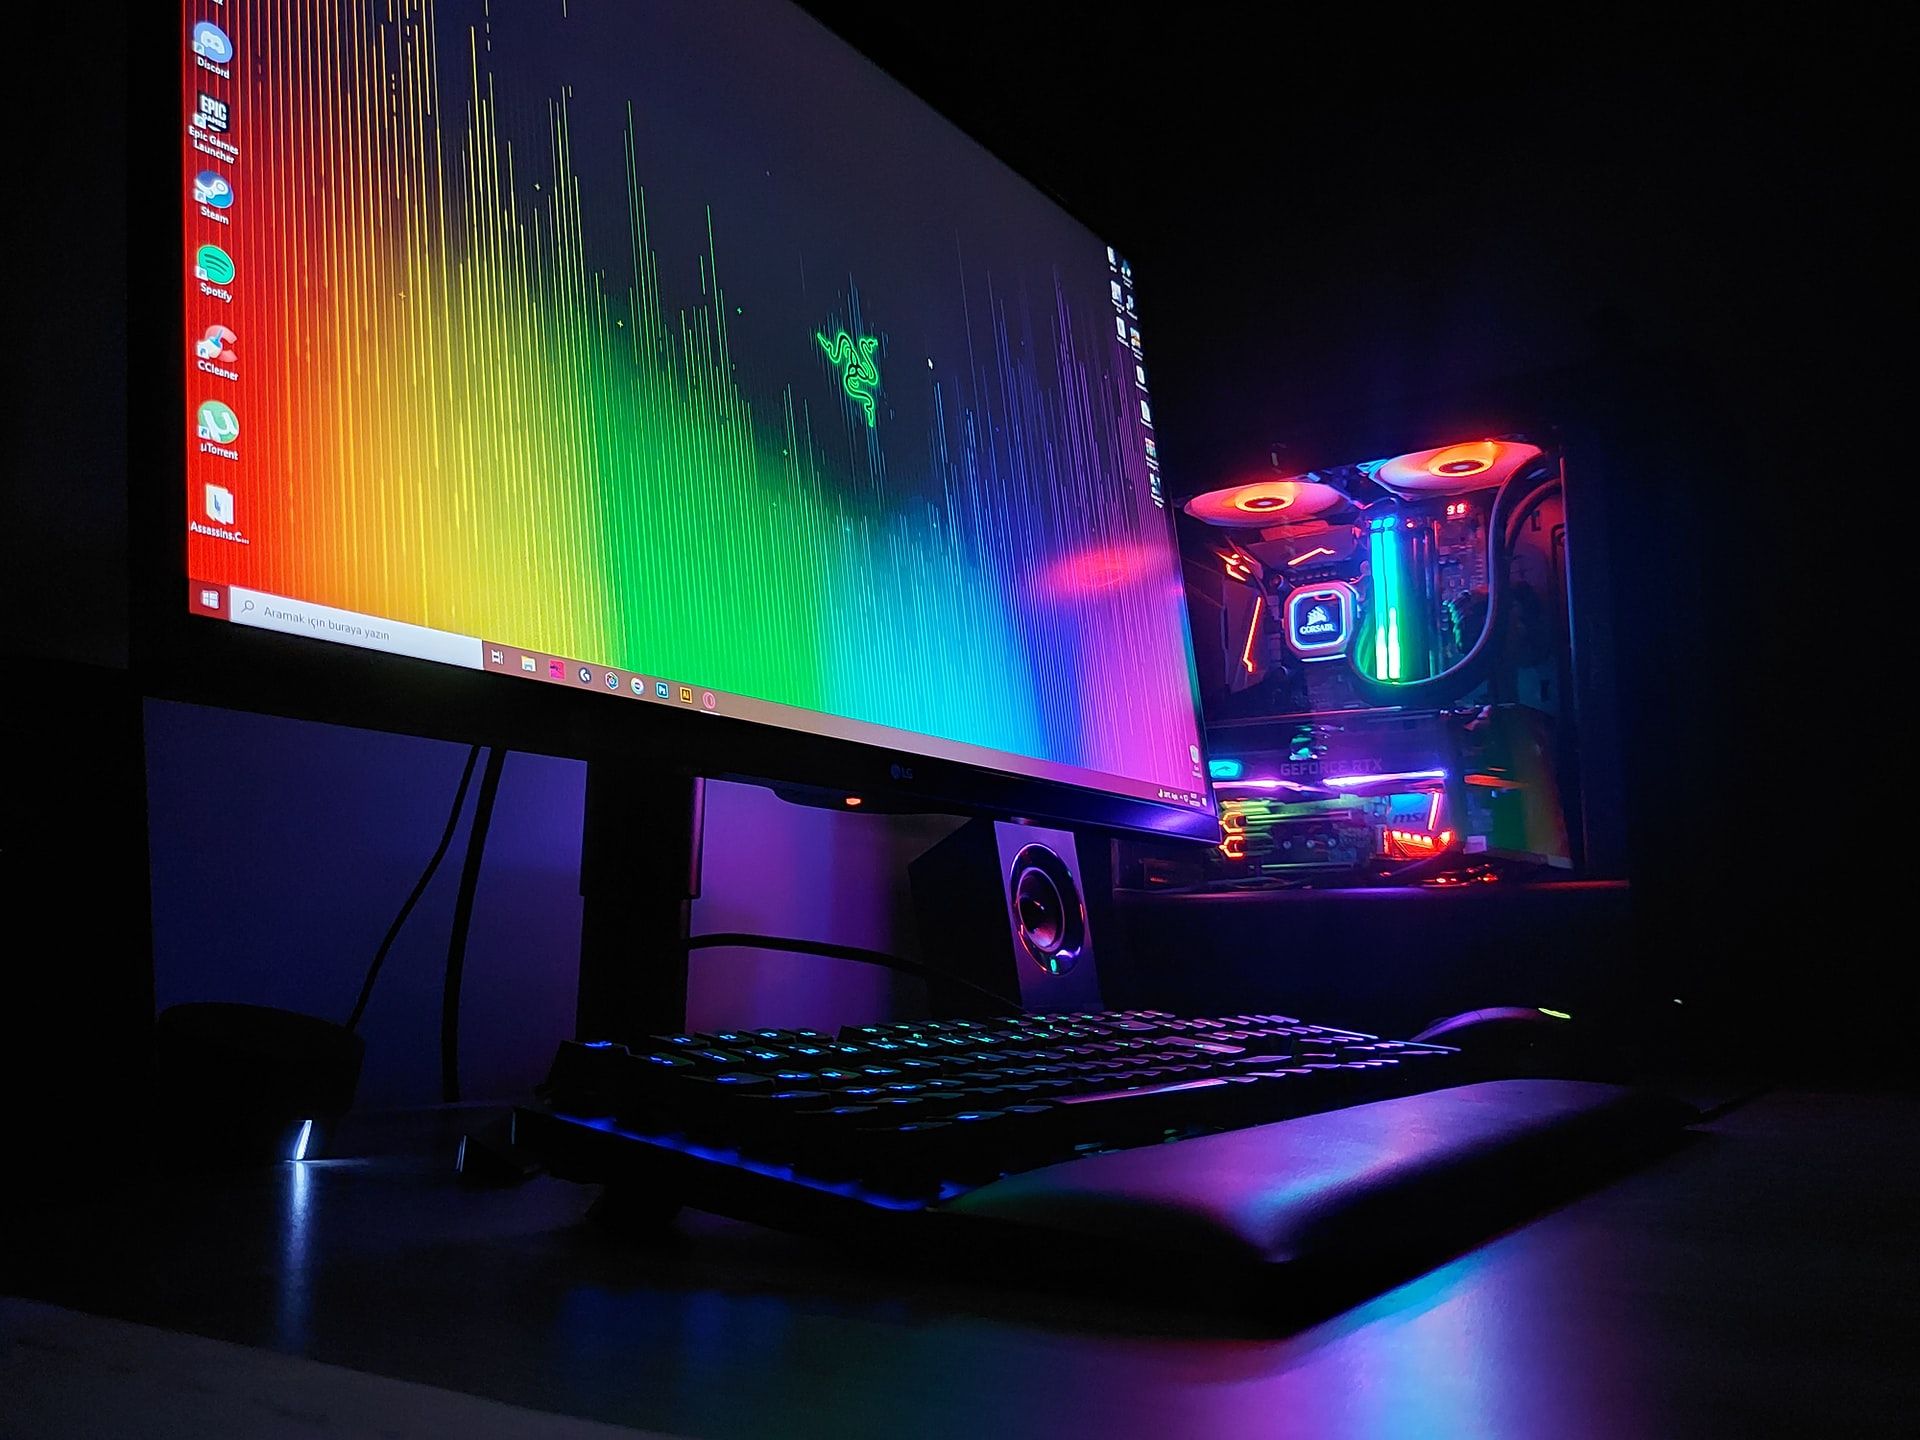 pc monitor with razer logo and gaming pc with rgb